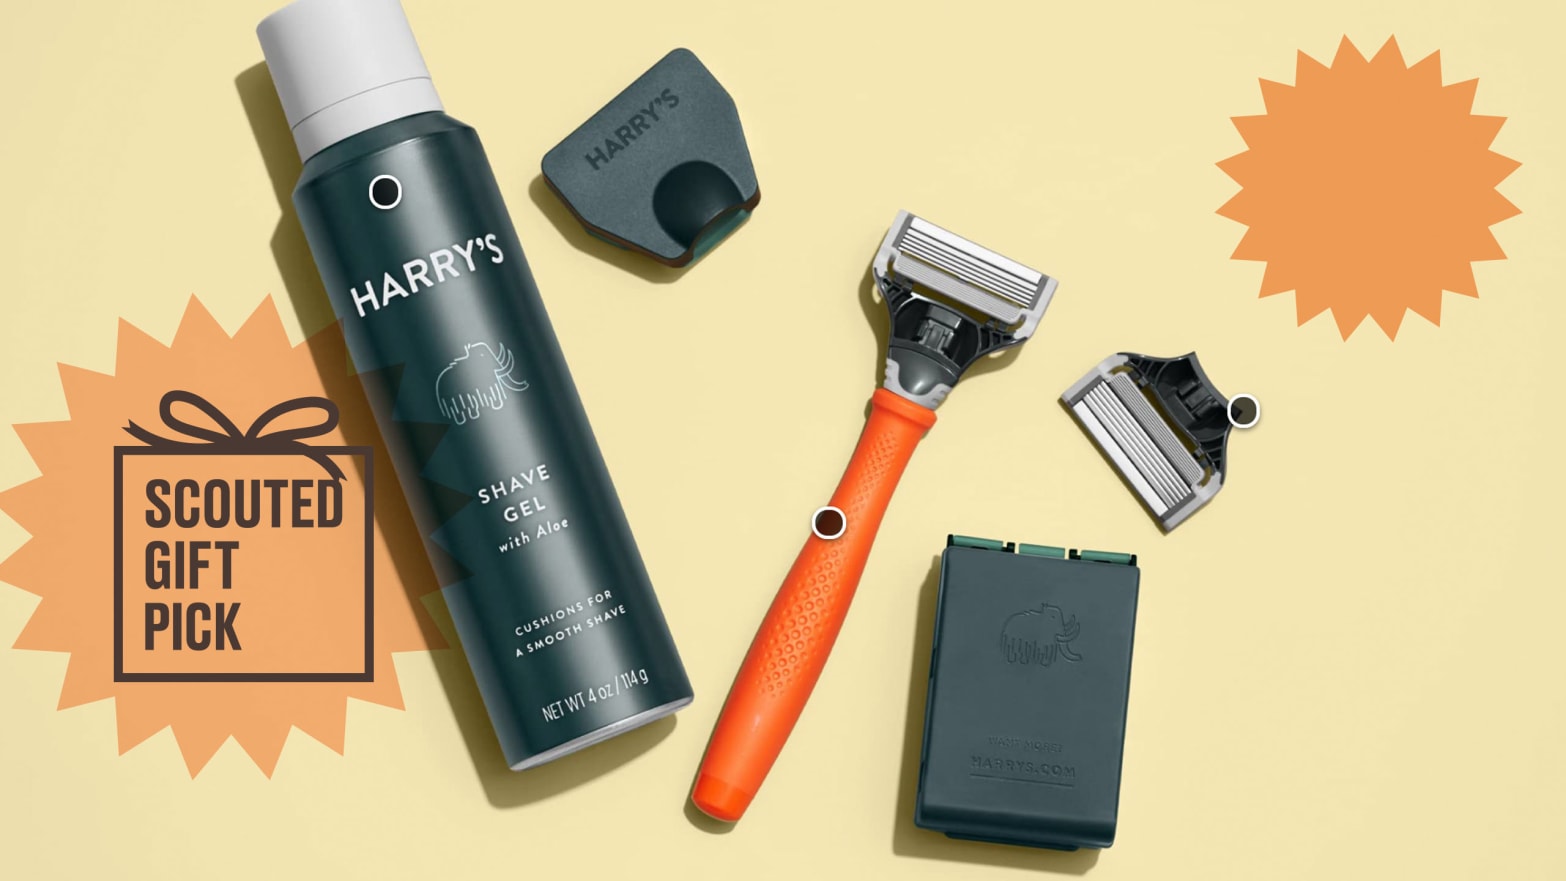 Harry's Shave Gel Review